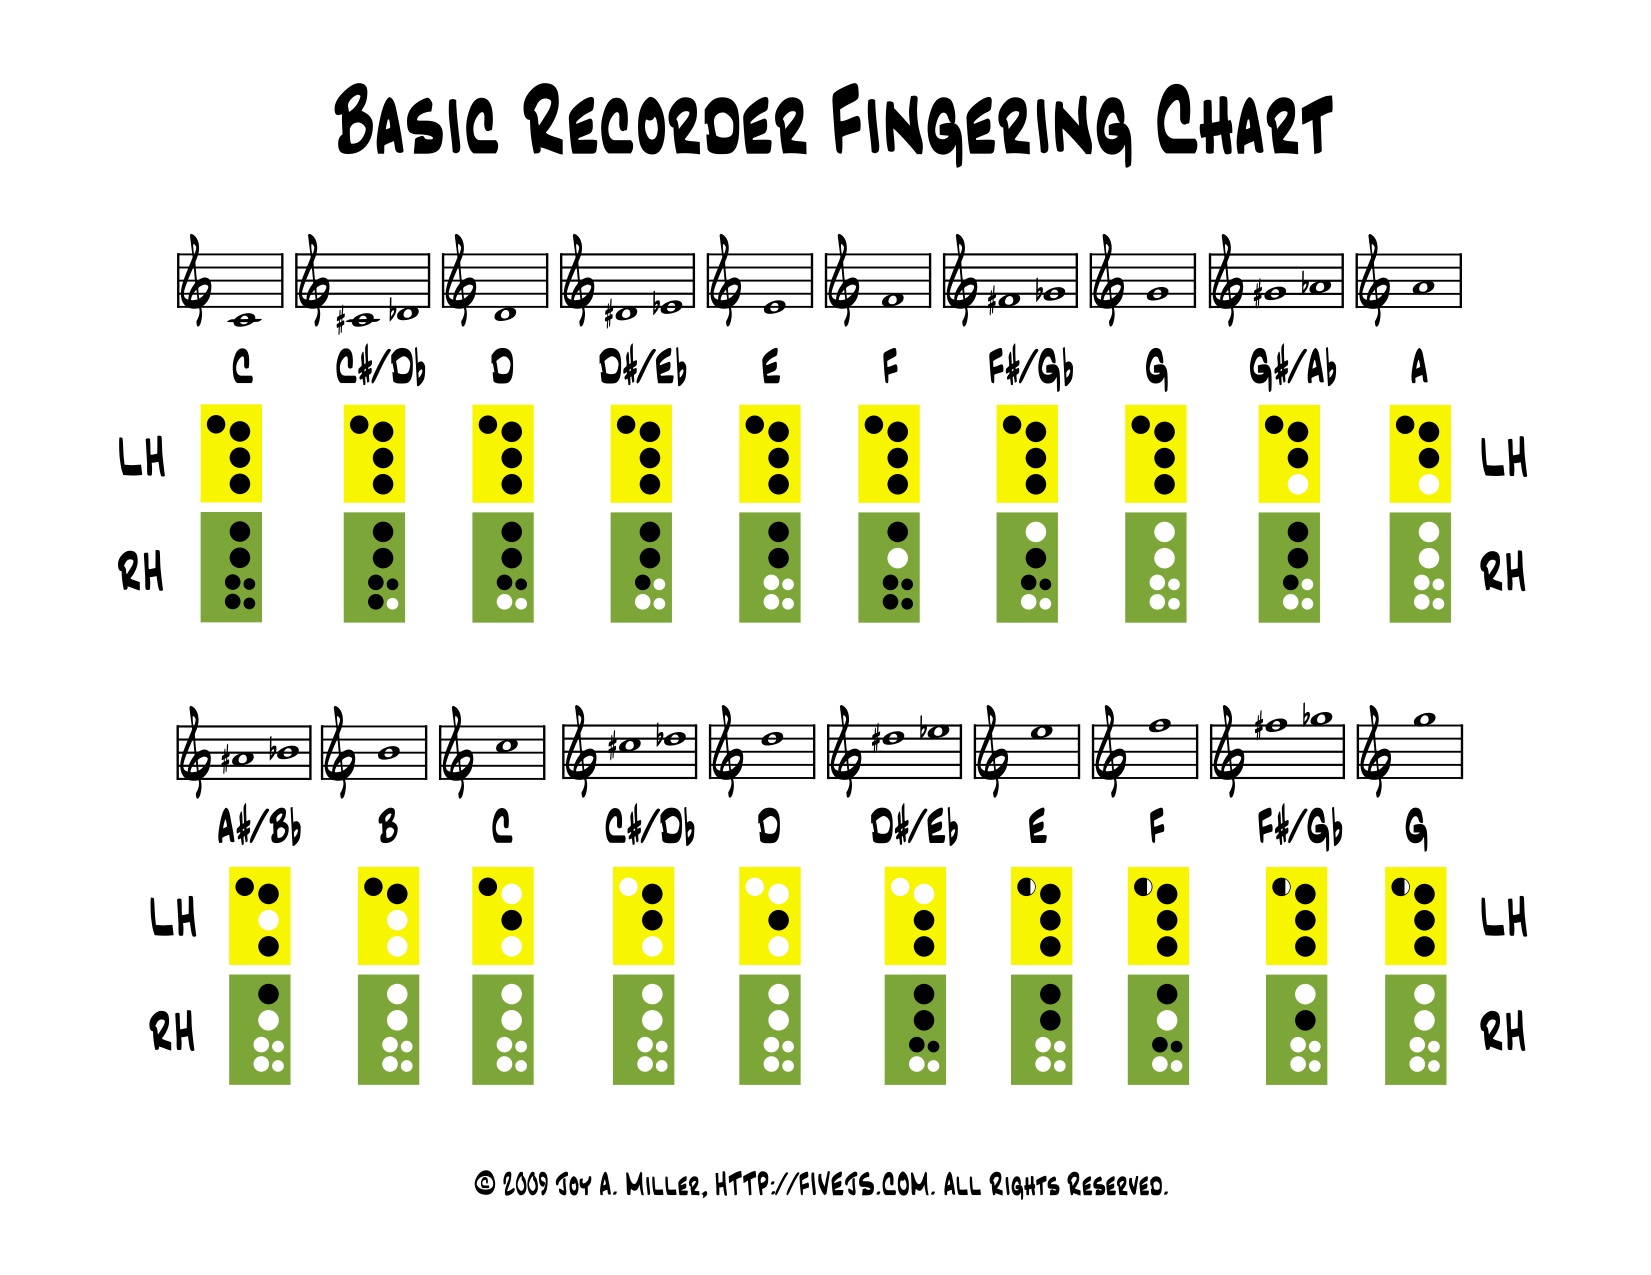 My Heart Will Go On Recorder Finger Chart